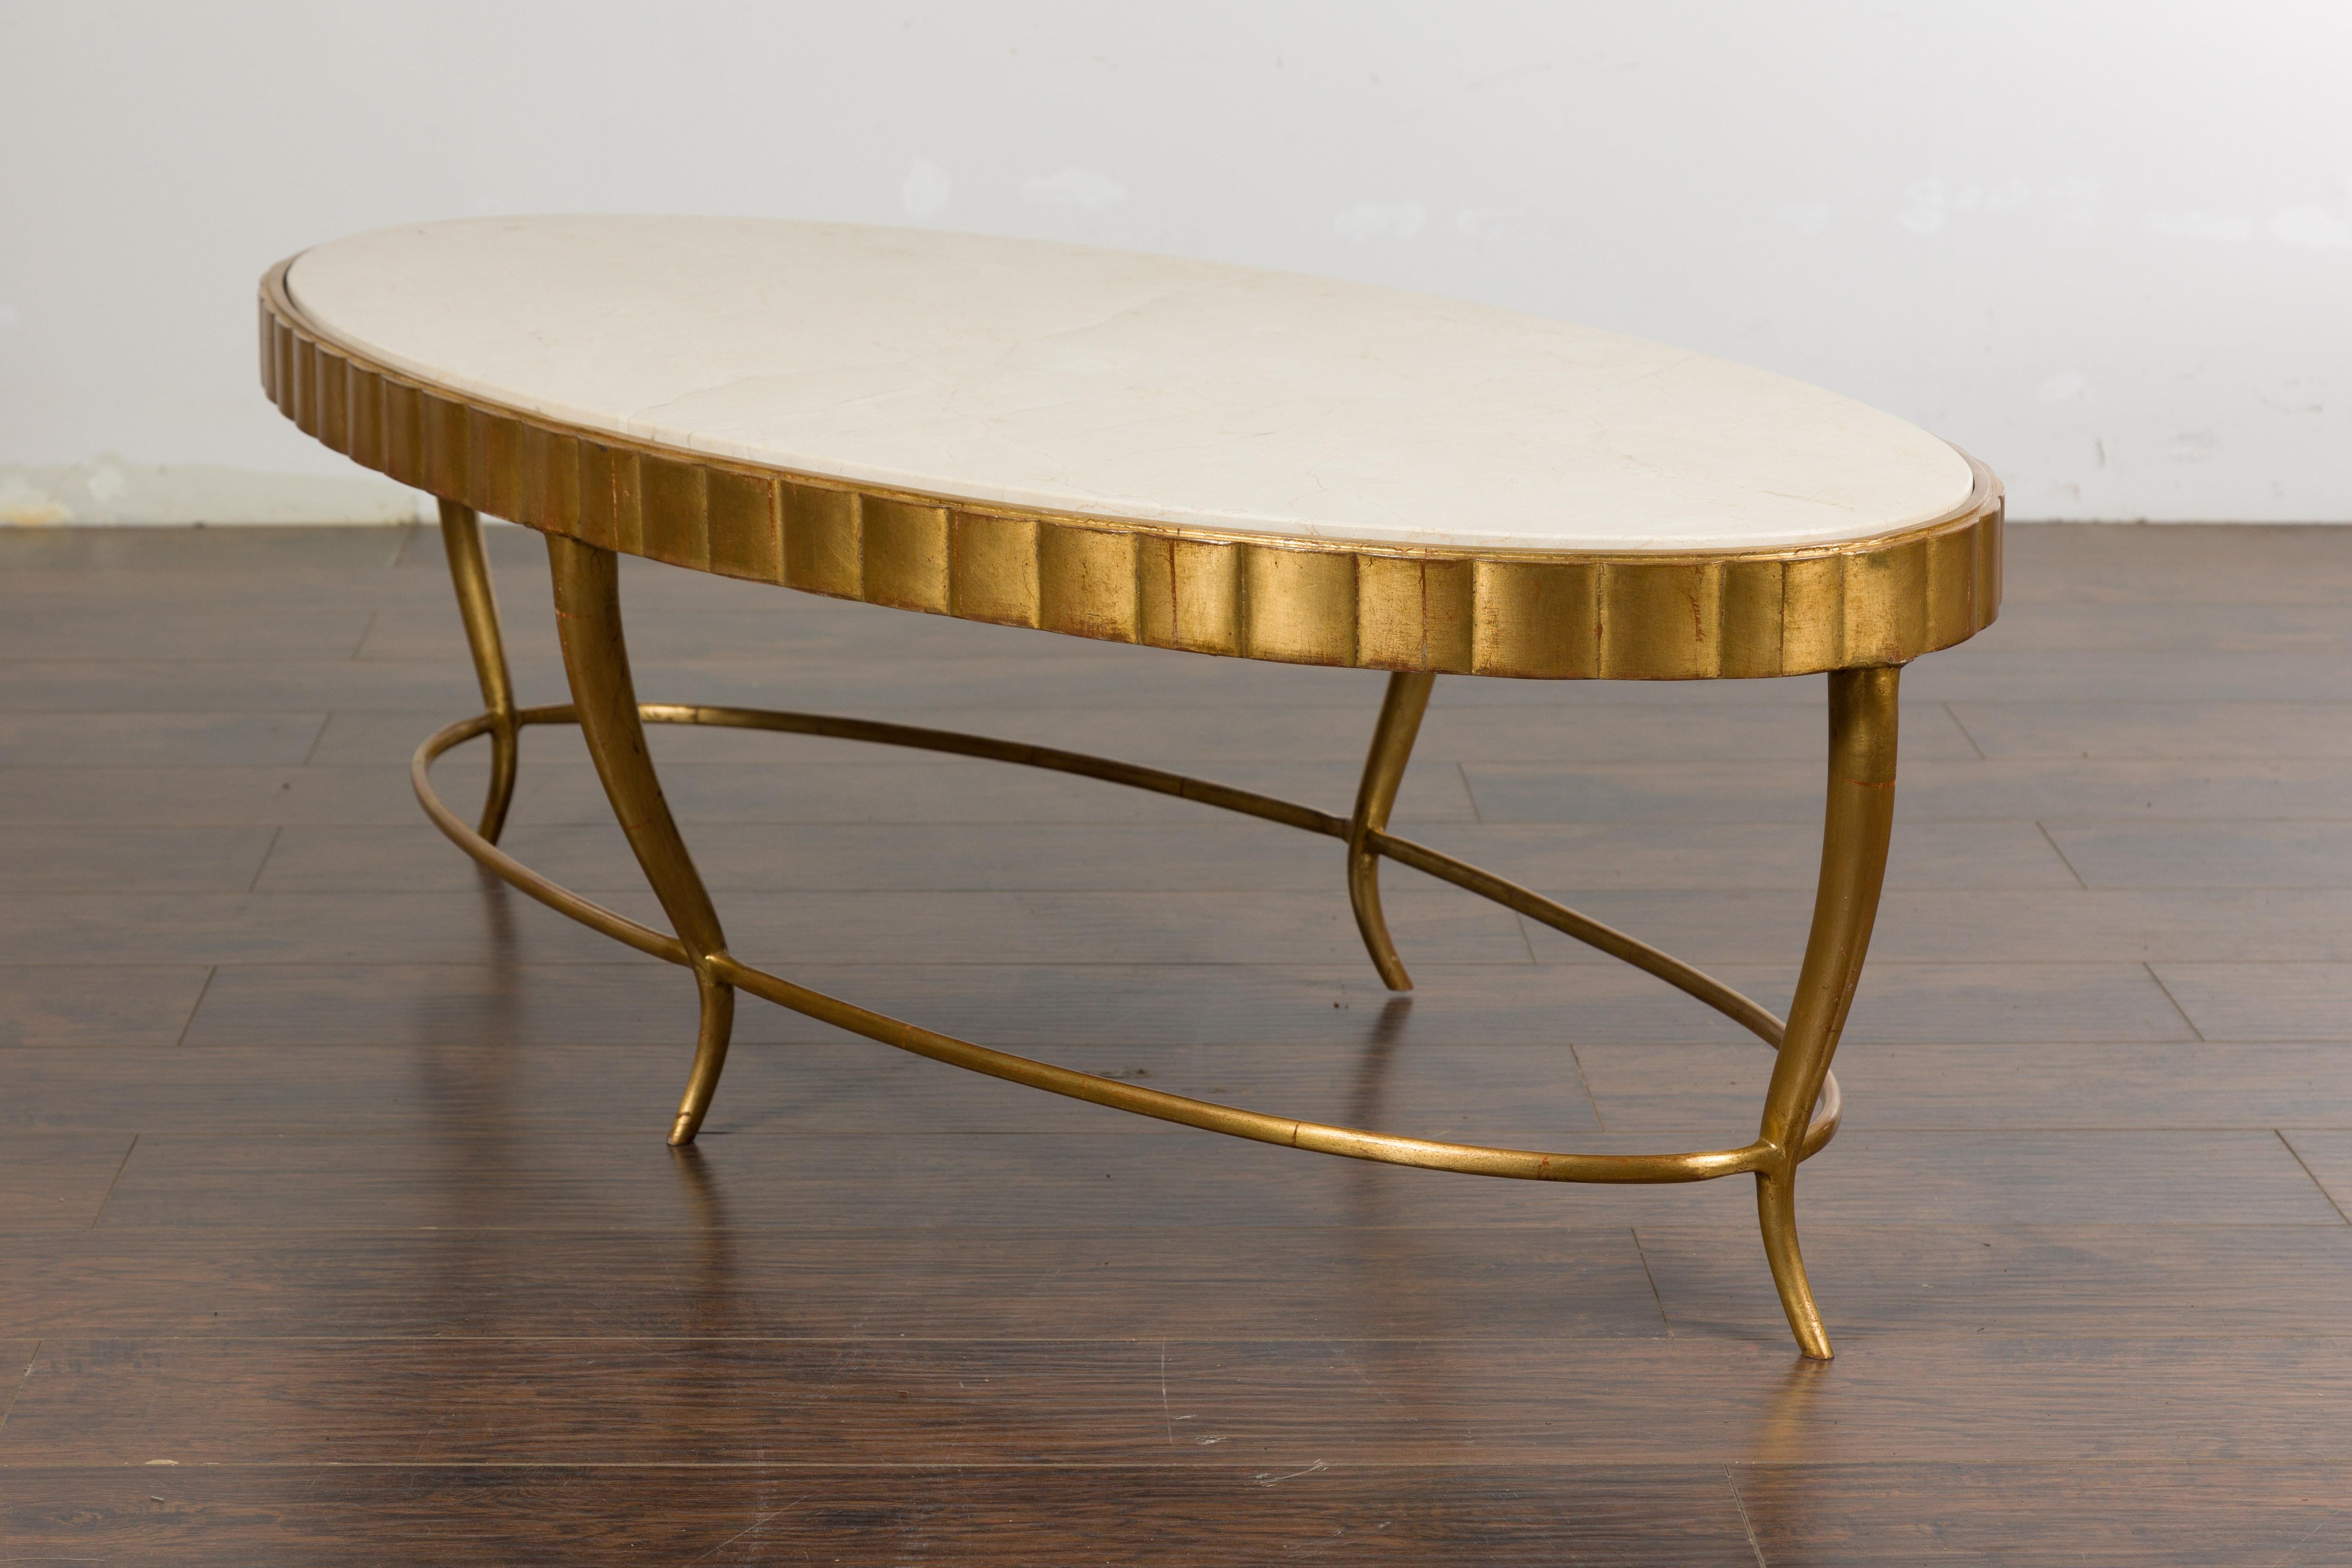 Italian Midcentury Gilt Metal Coffee Table with Oval Cream Marble Top 9